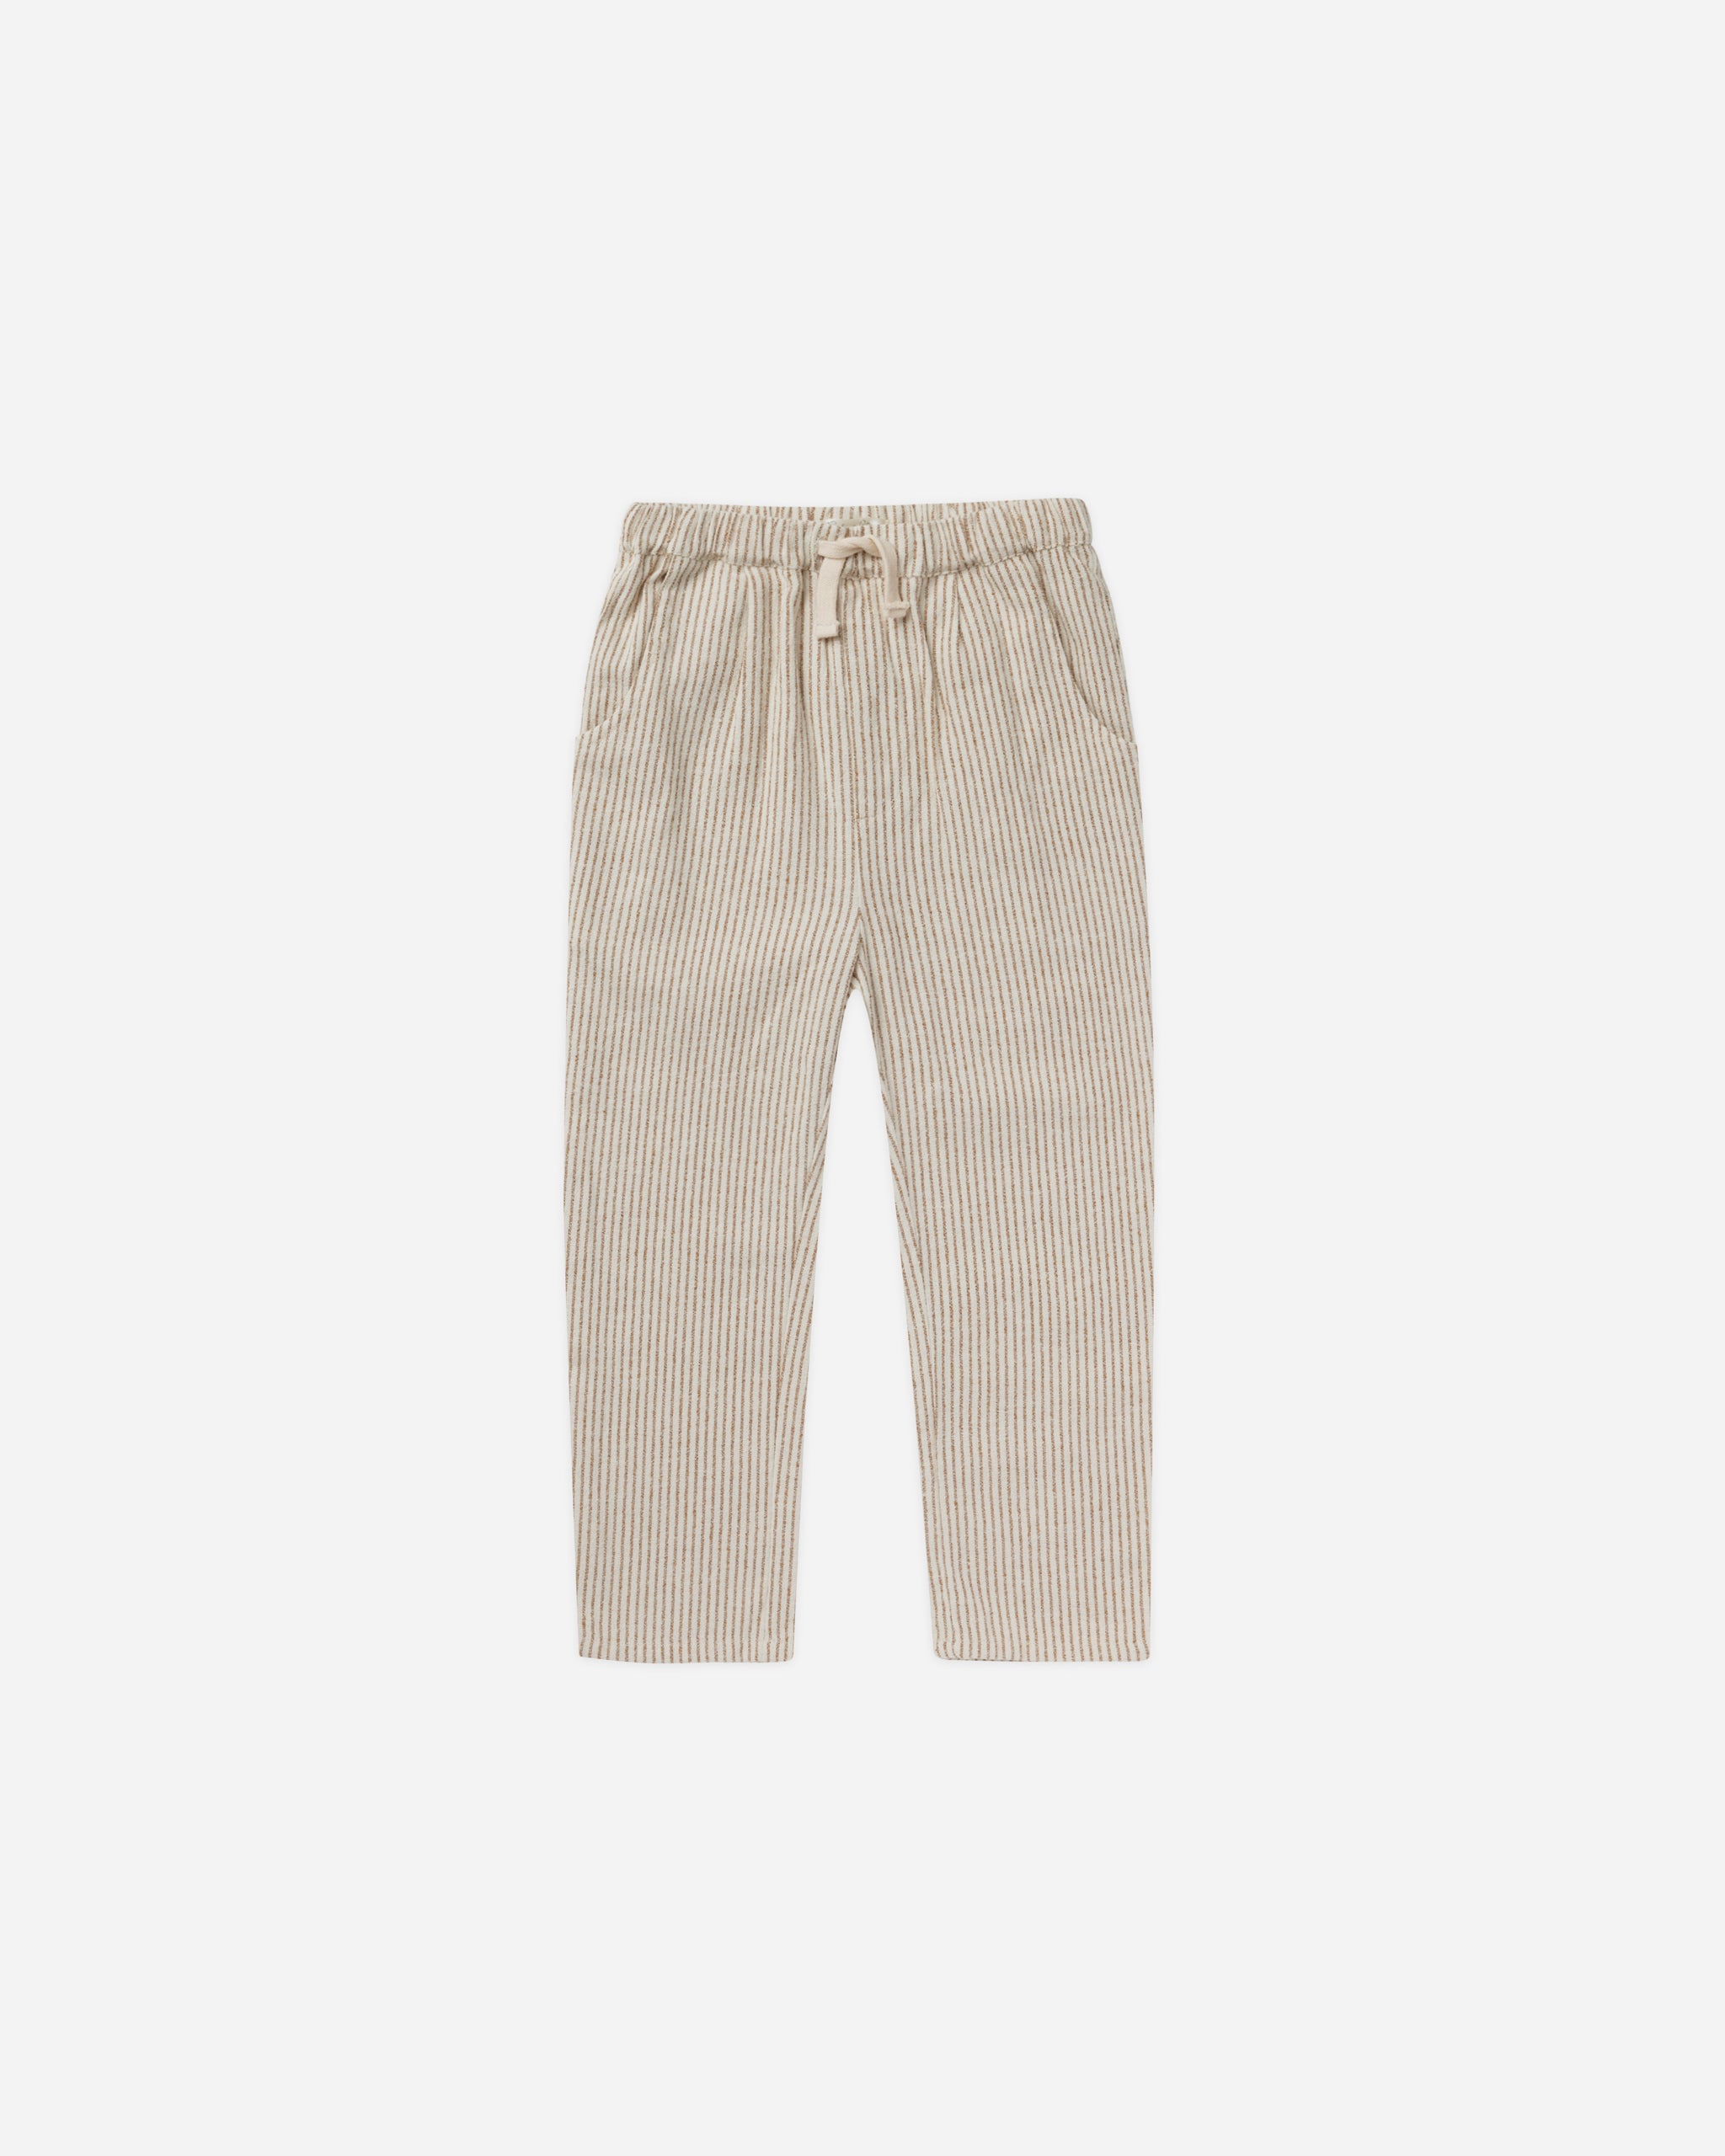 Ethan Trouser || Brass Pinstripe - Rylee + Cru | Kids Clothes | Trendy Baby Clothes | Modern Infant Outfits |